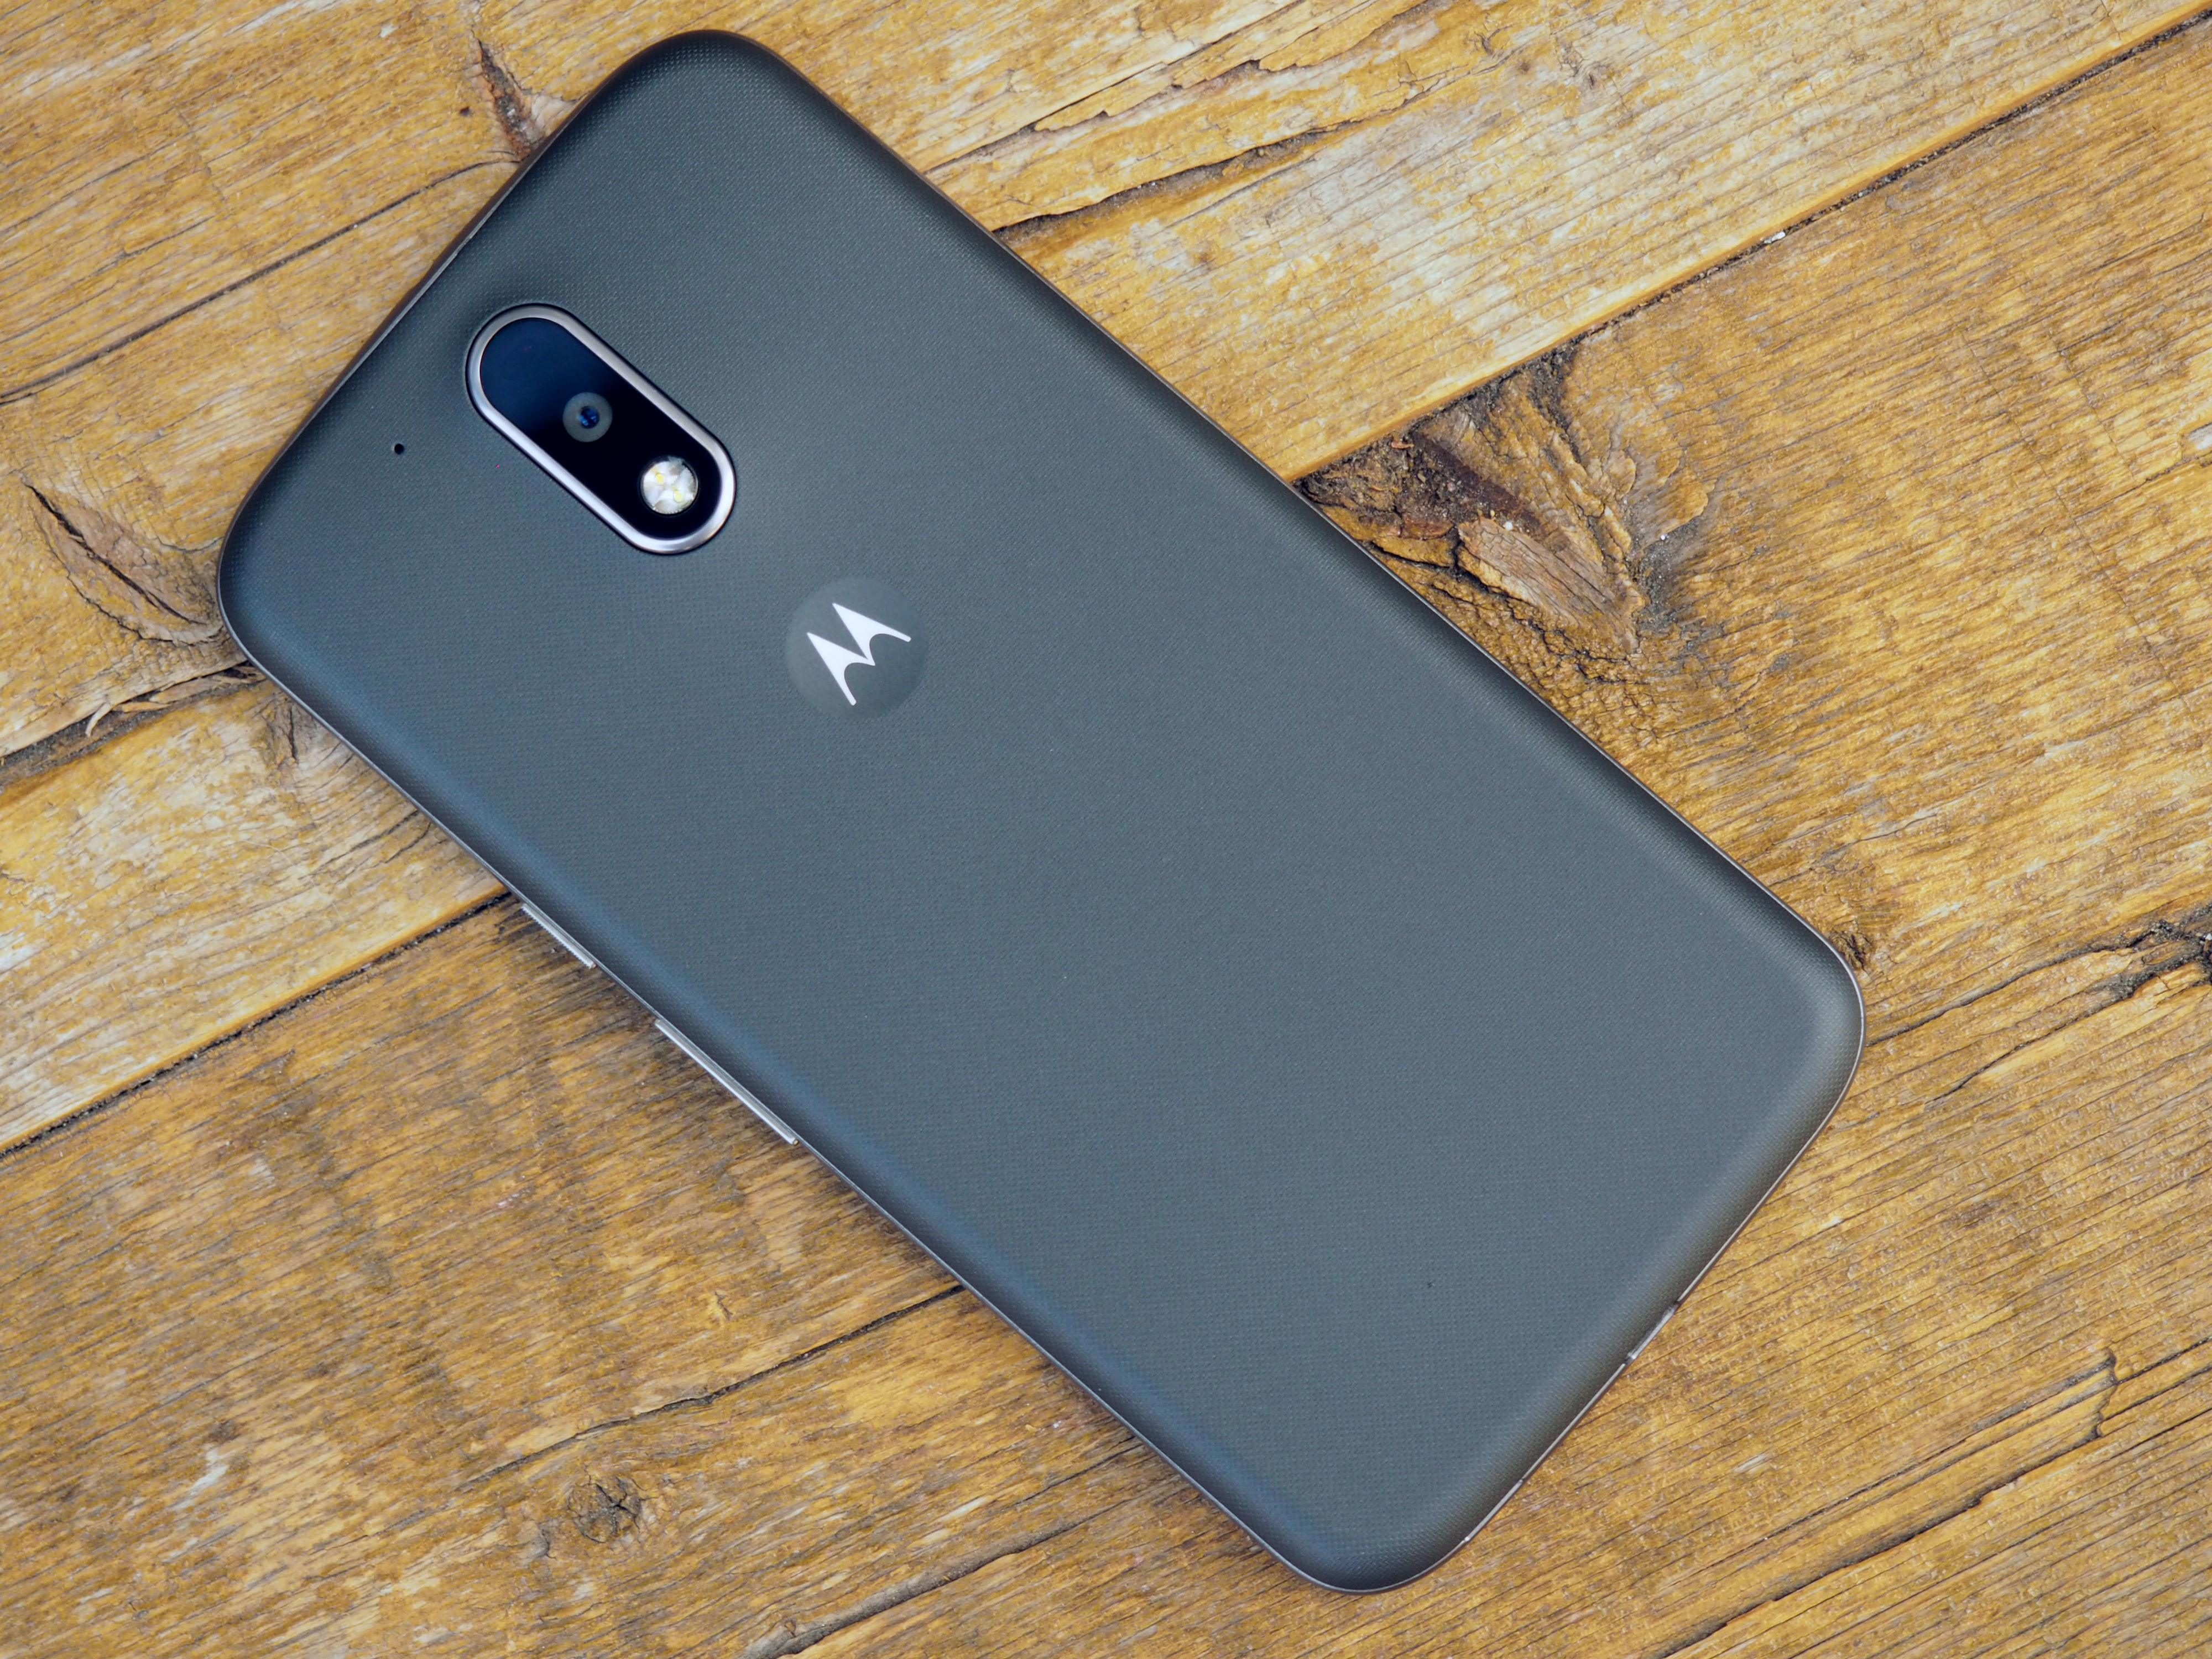 Willen scherp Caius Motorola delivers a lot for a little with the $199 Moto G4 | TechCrunch